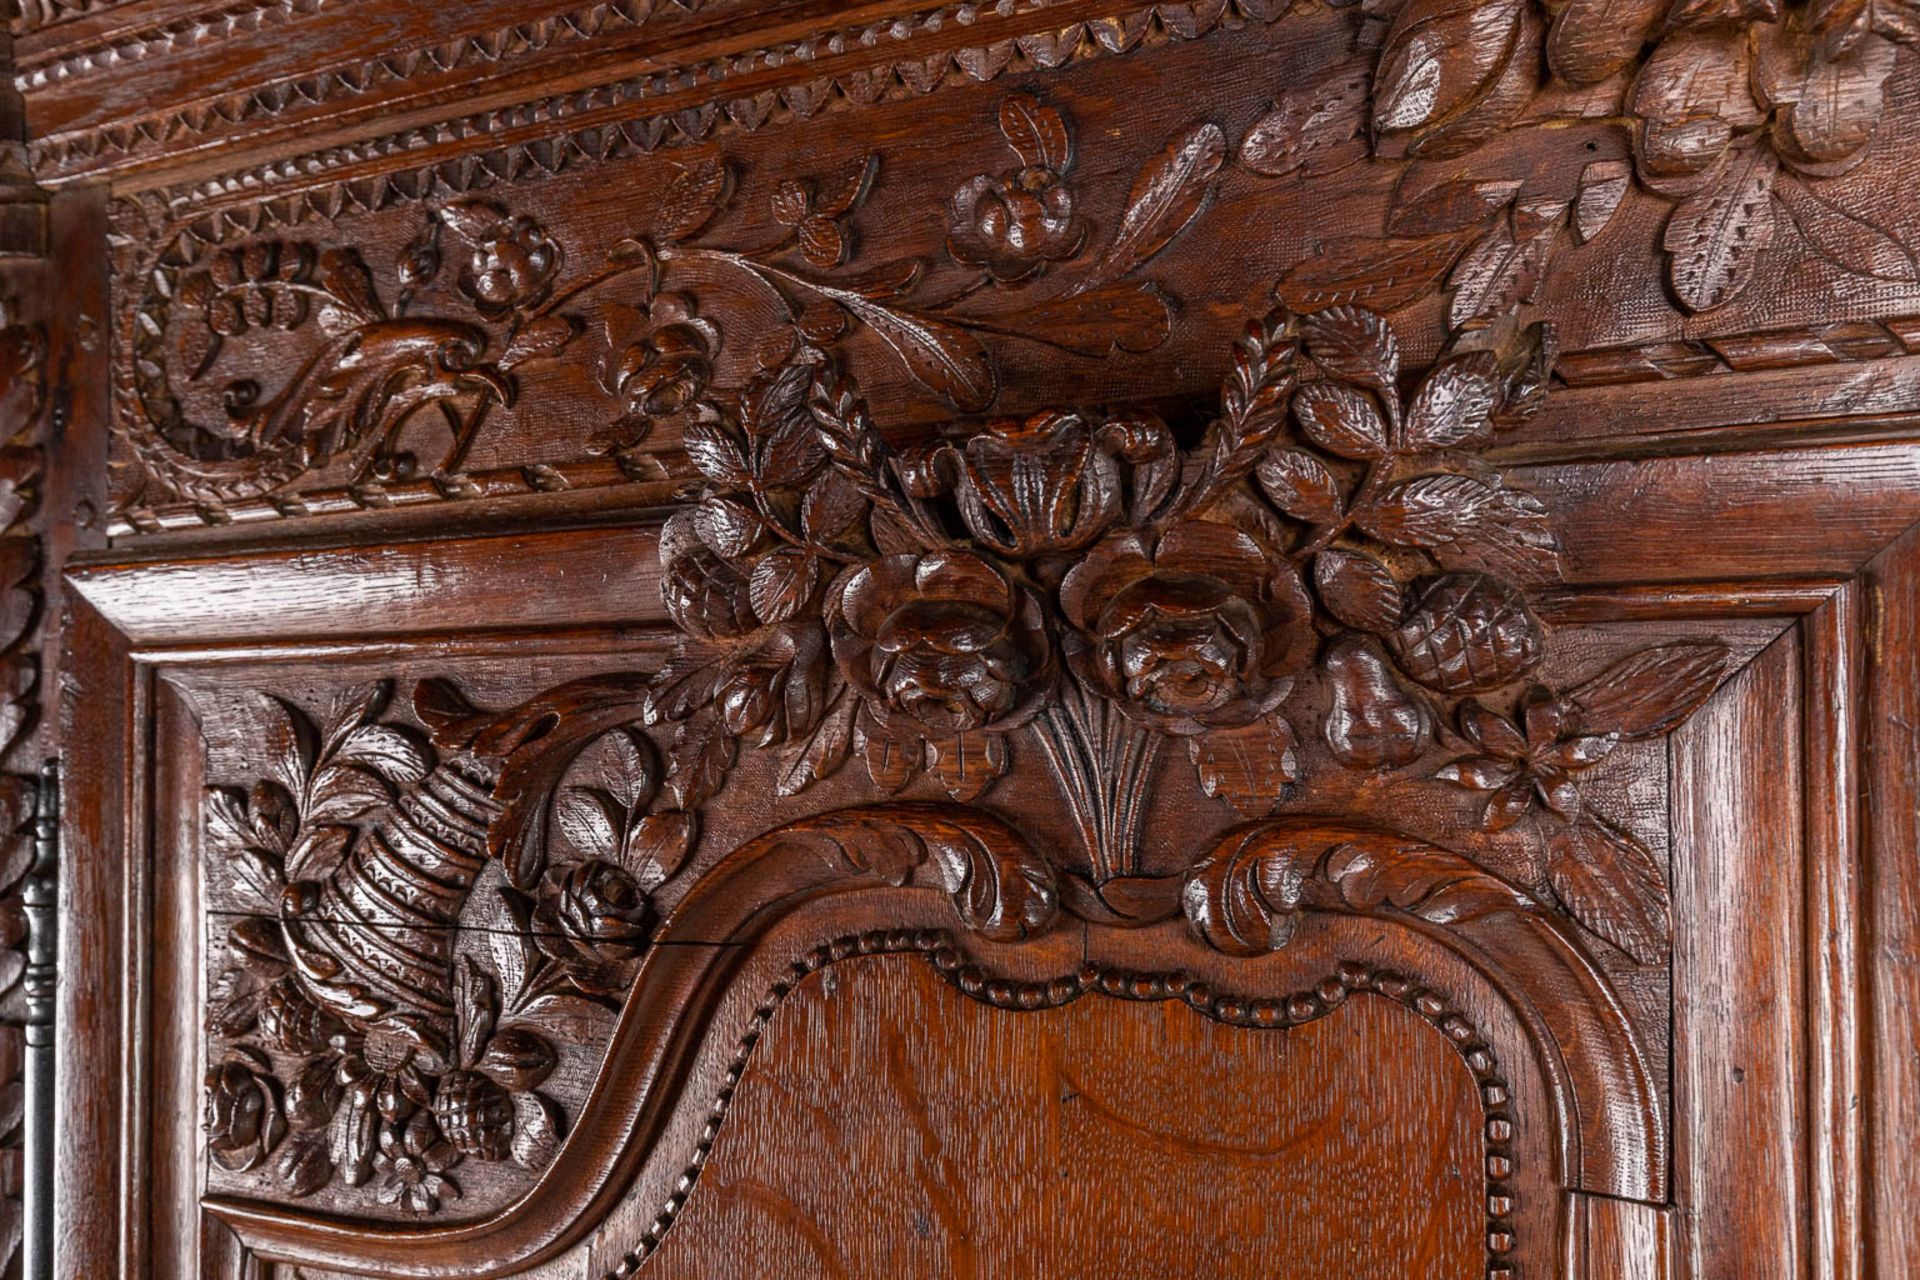 A richly sculptured and antique Normandy high cabinet, Armoire. France, 18th C. (D:68 x W:175 x H:23 - Image 14 of 21